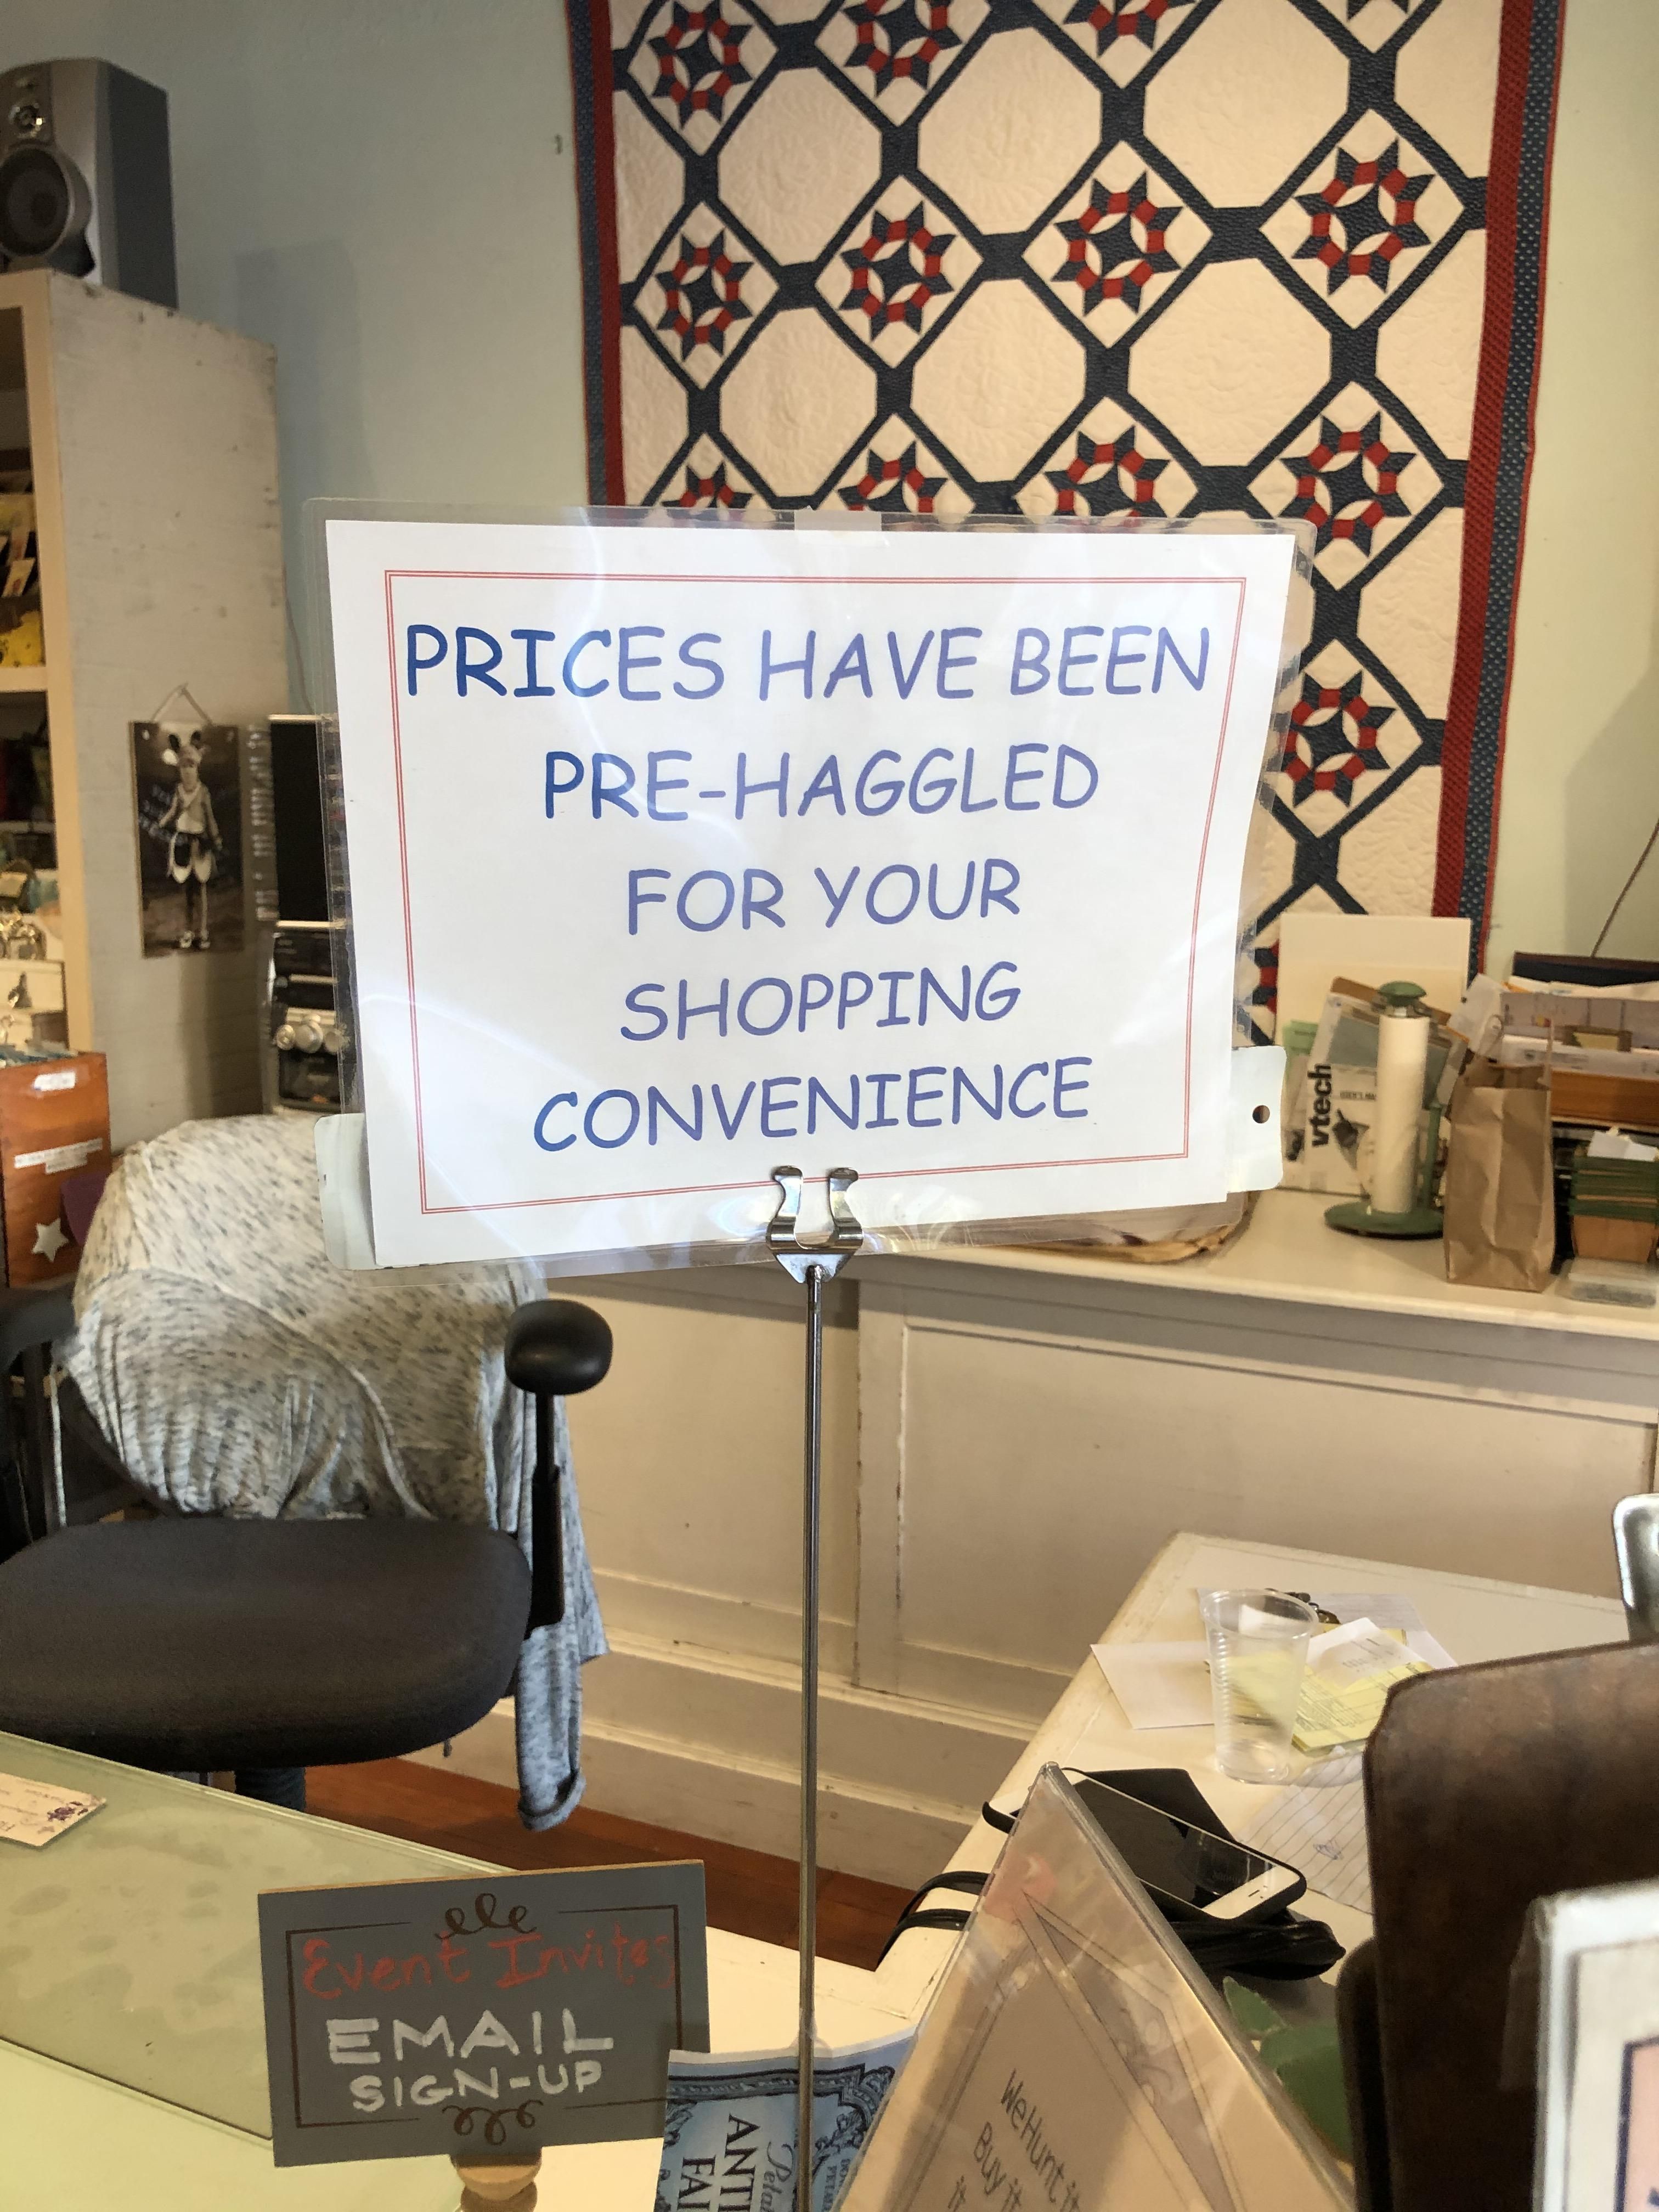 This sign in an antique store.